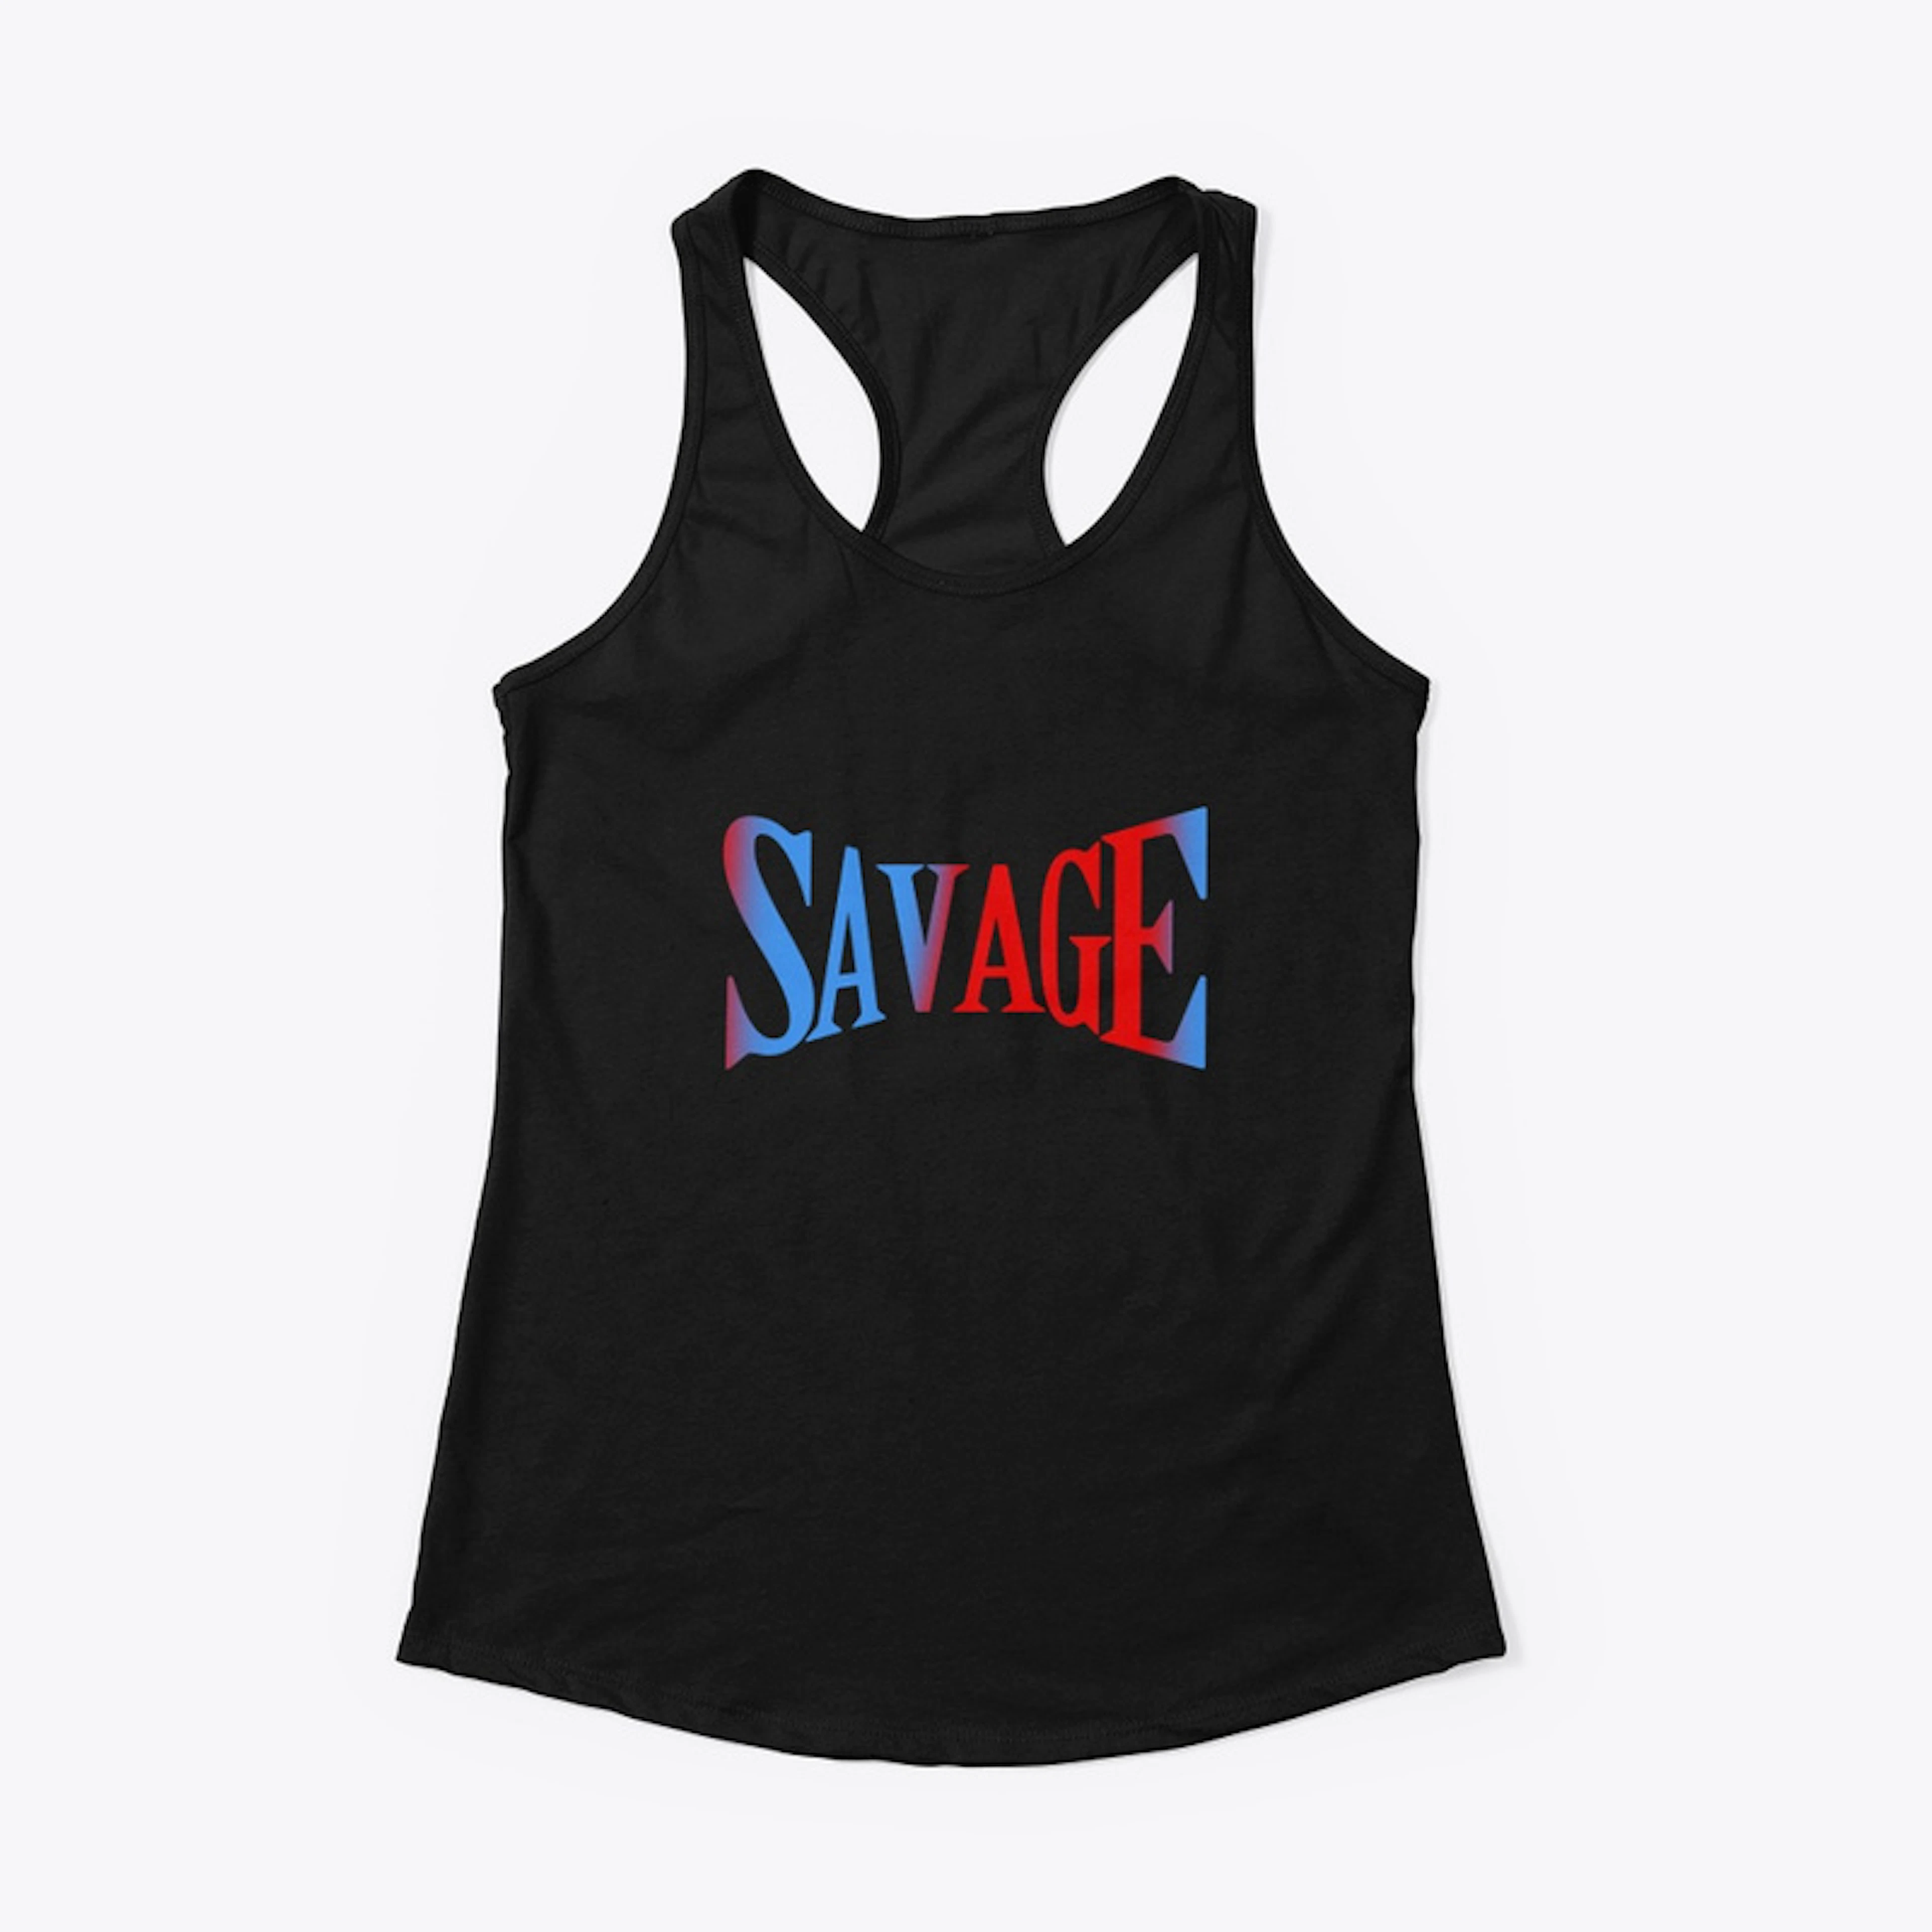 New Savage Design By Switch Teez